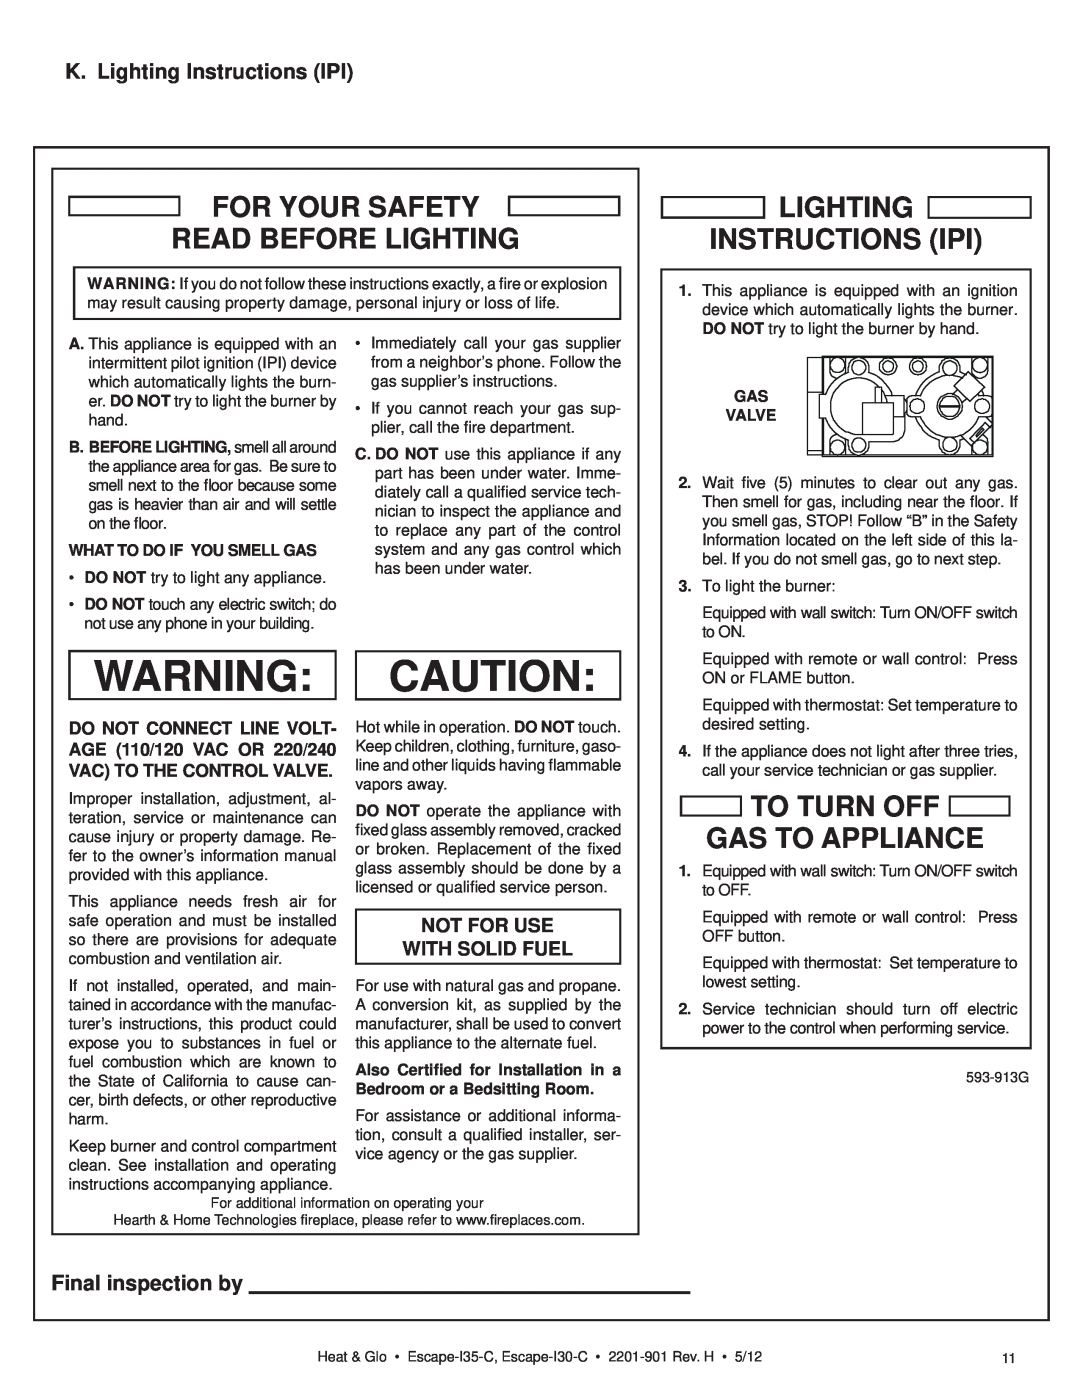 Heat & Glo LifeStyle ESCAPE-I35-C K. Lighting Instructions IPI, Final inspection by, For Your Safety Read Before Lighting 